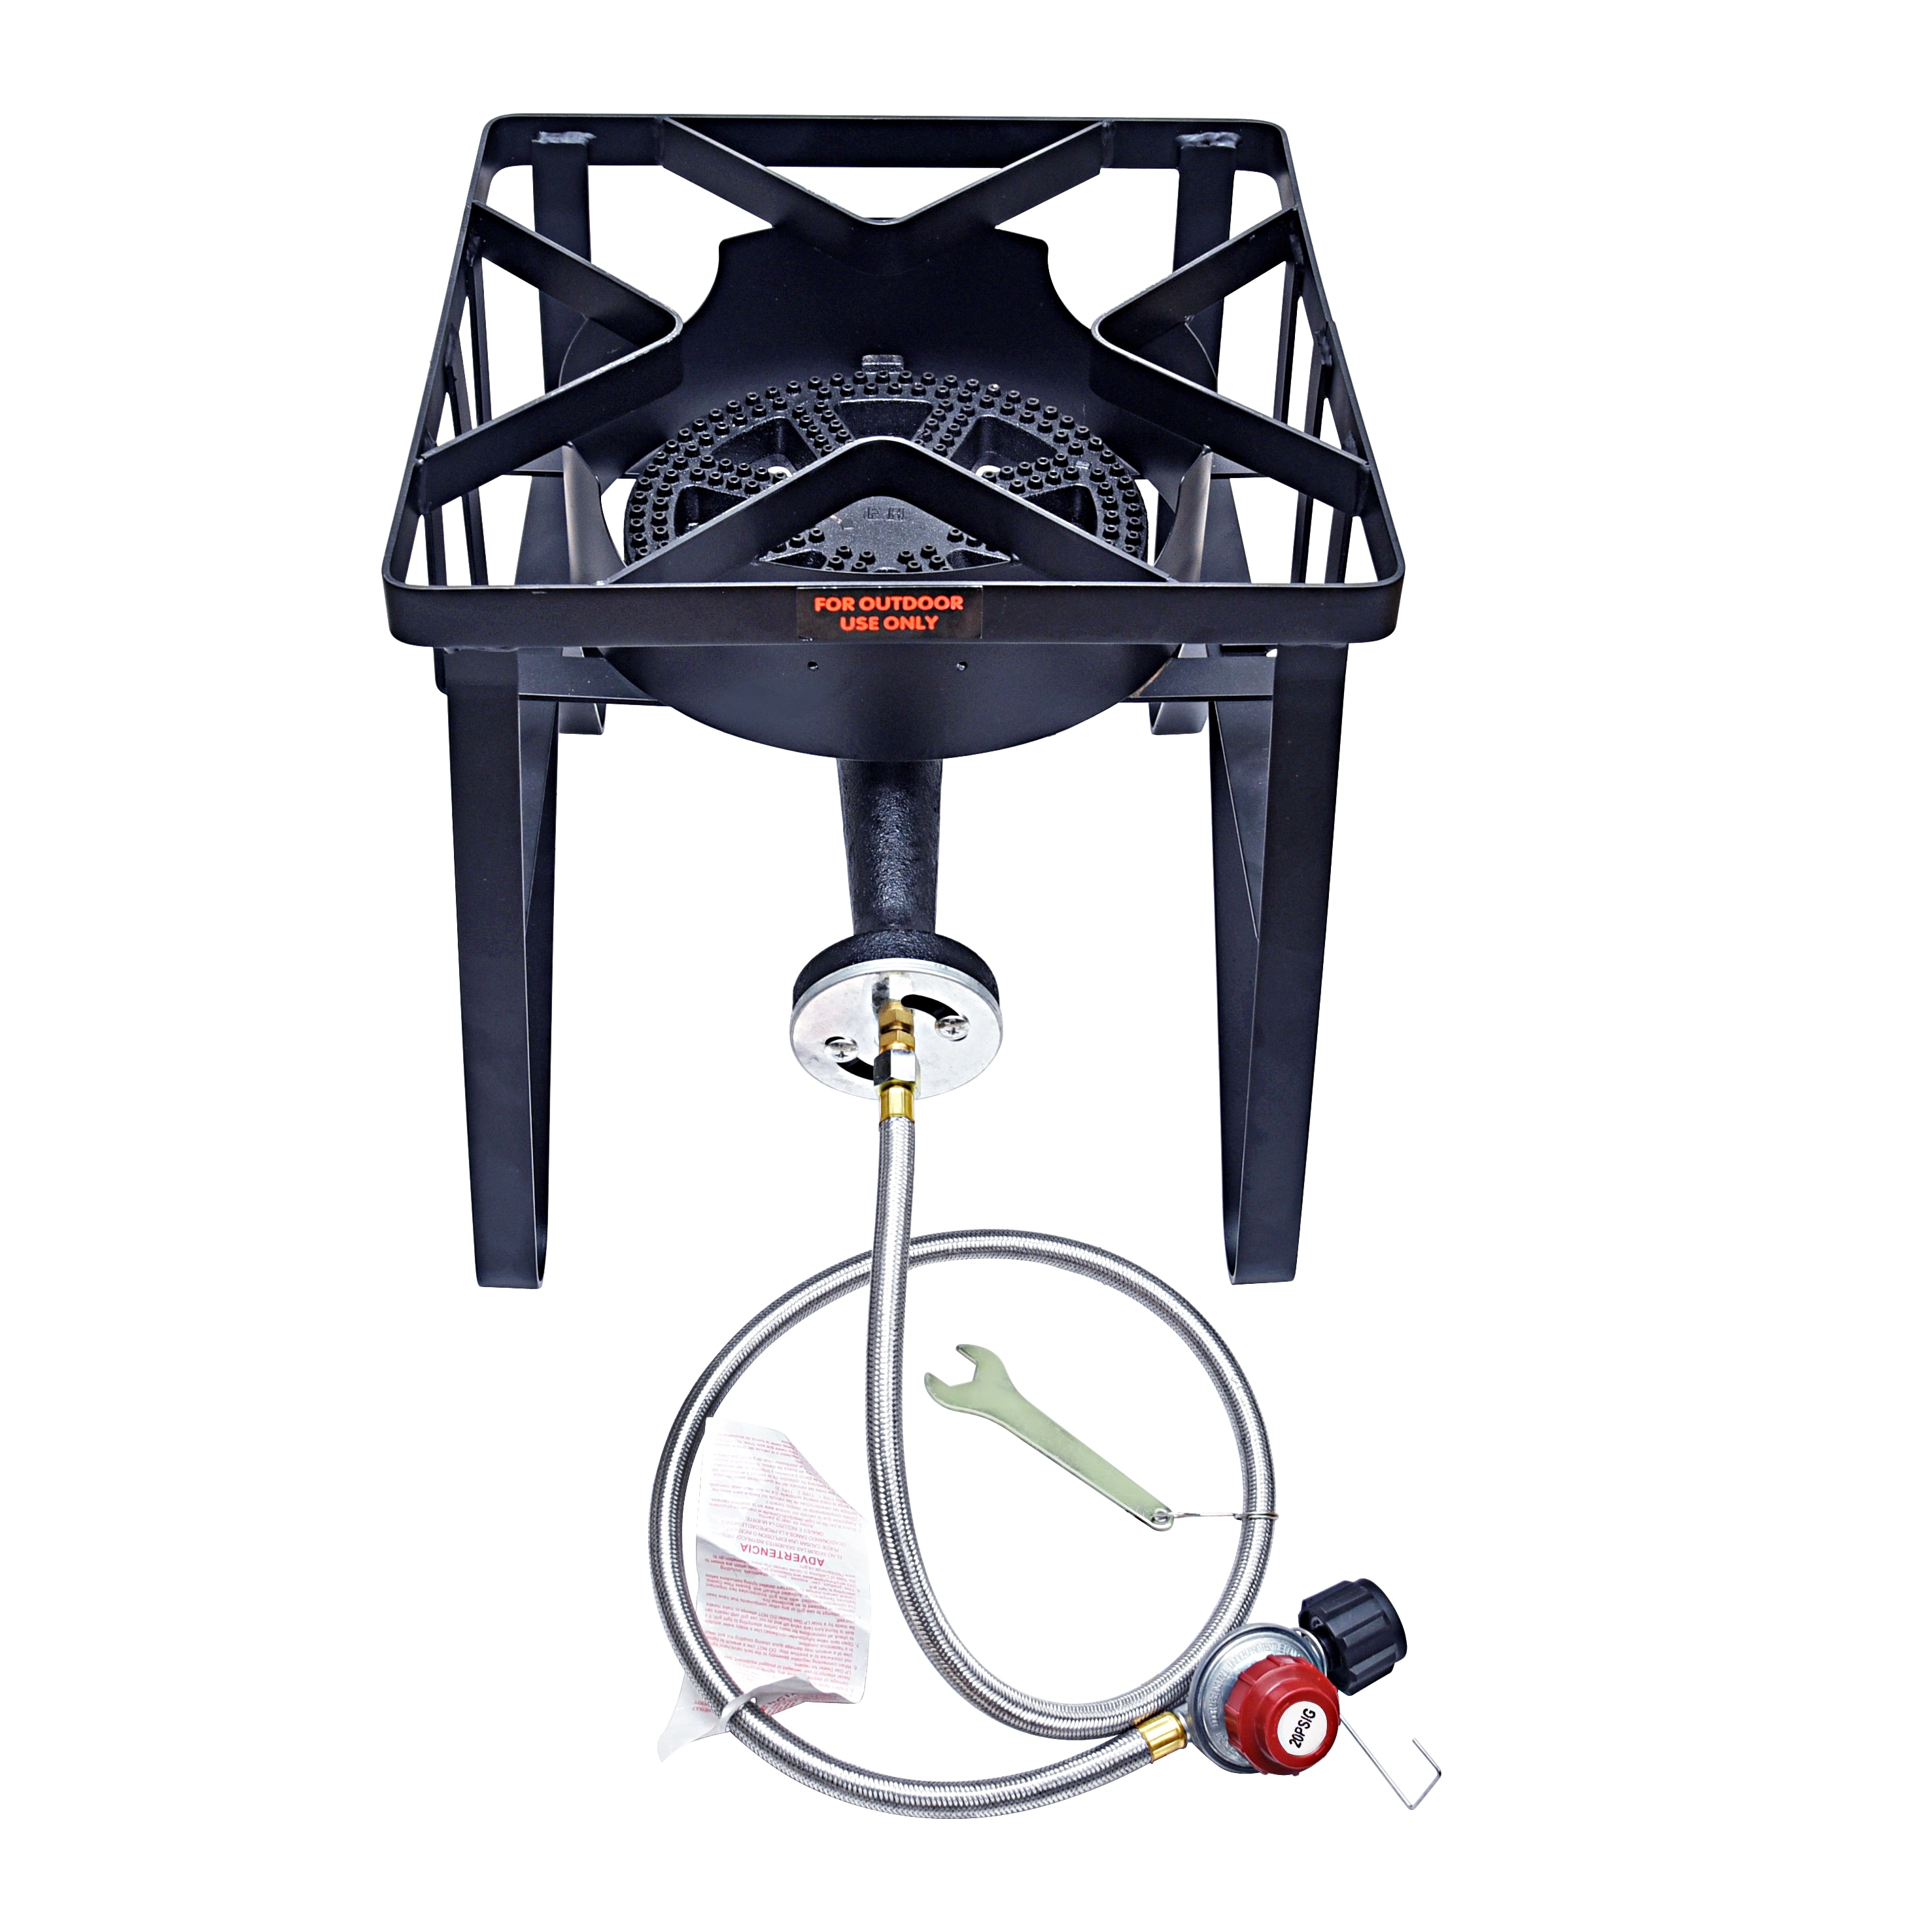  ARC Propane Burners For Outdoor, Wok Burner Single Propane  Burner With Adjustable Legs, 65,000BTU Cast Iron Portable Propane Stove  Great For Camping And Turkey Frying, Crawfish Cooking : Patio, Lawn 